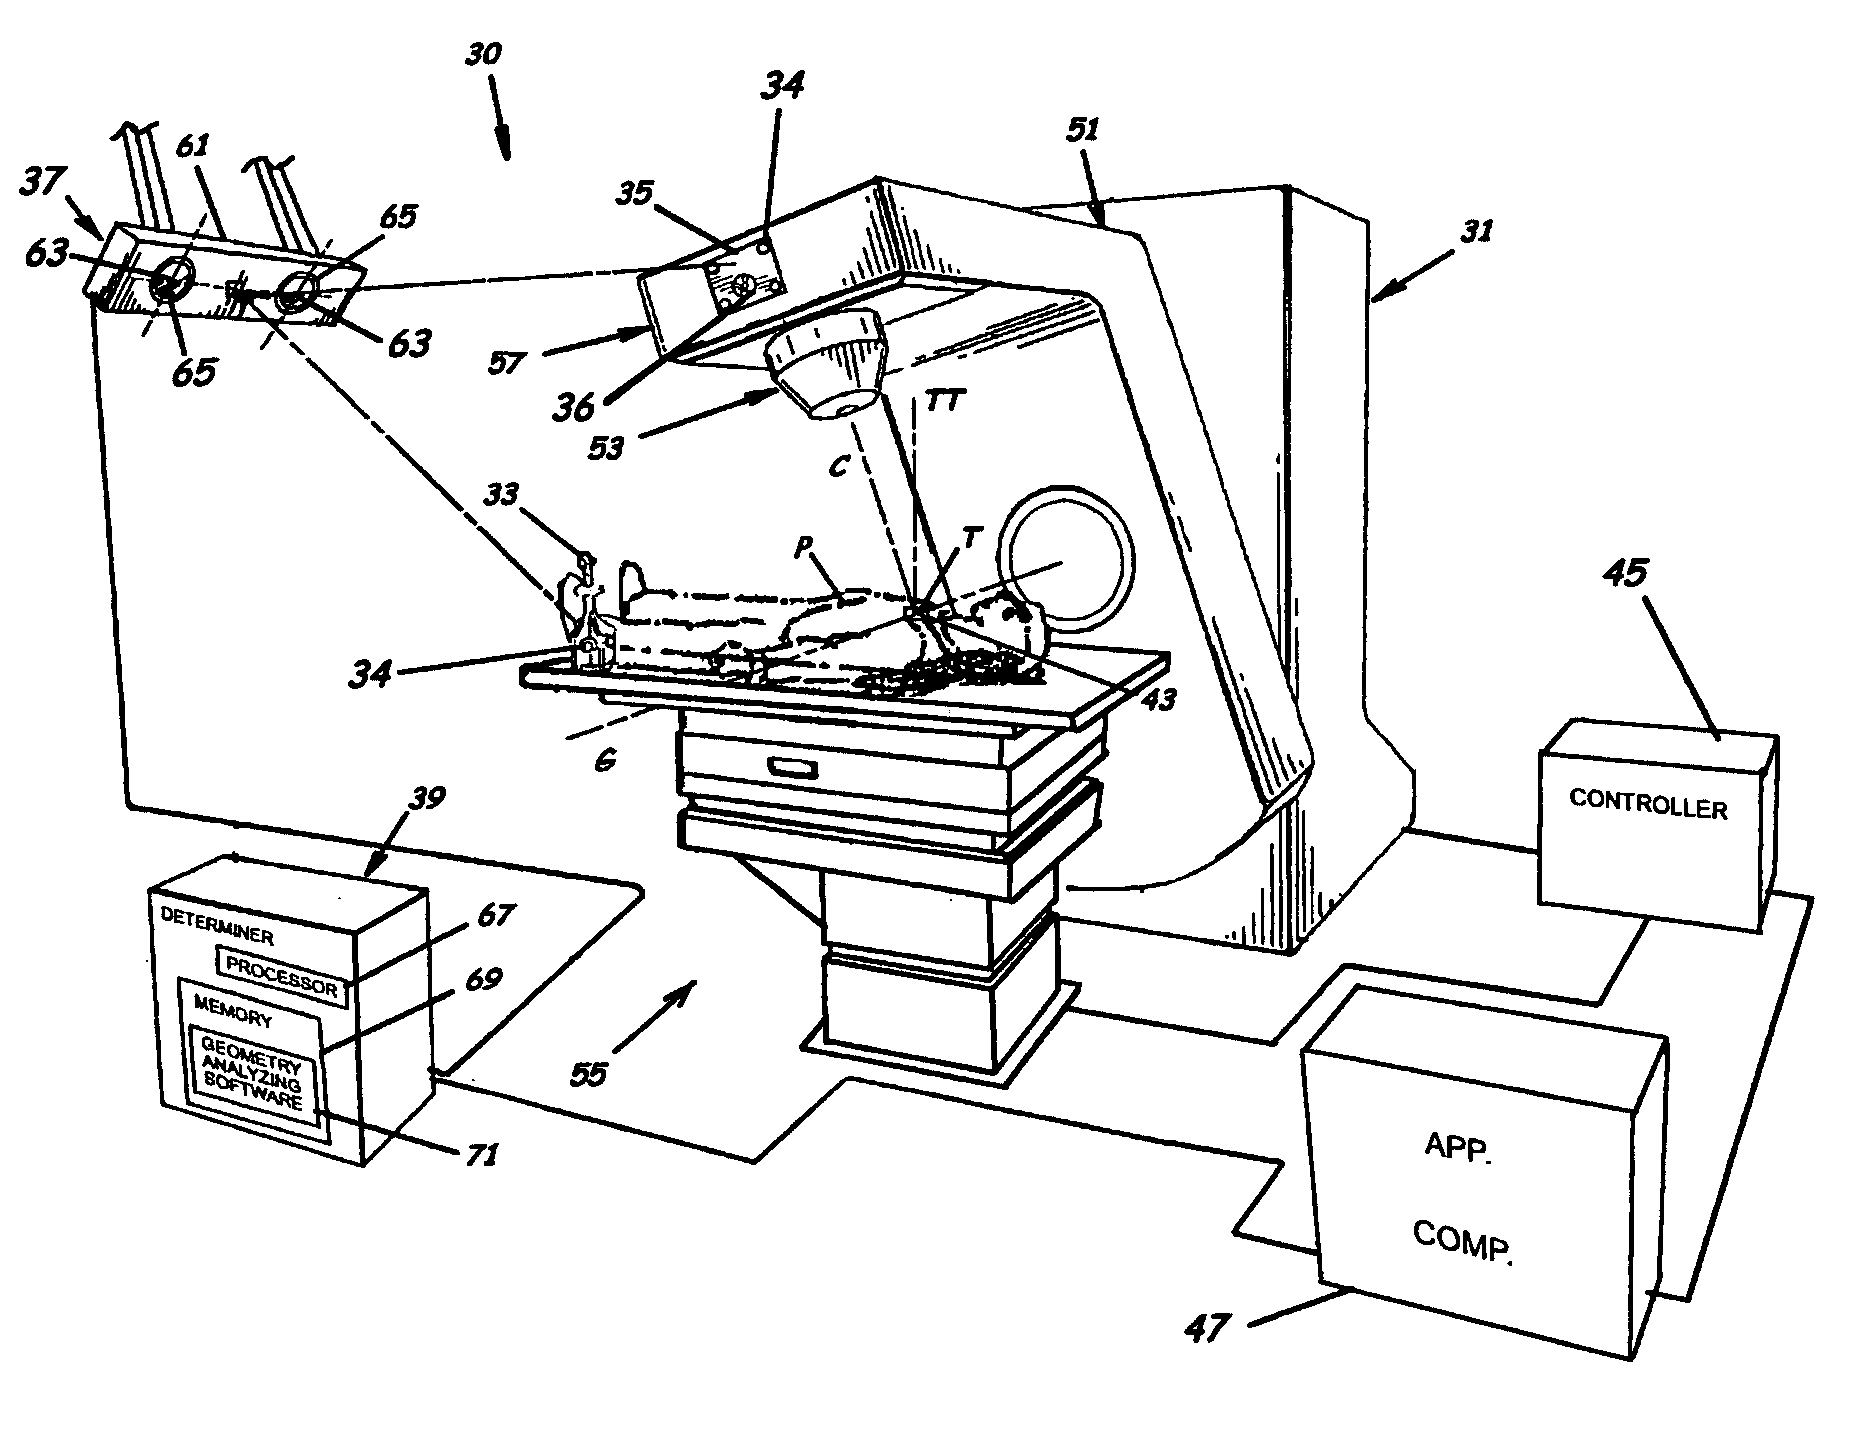 System for analyzing the geometry of a radiation treatment apparatus, software and related methods